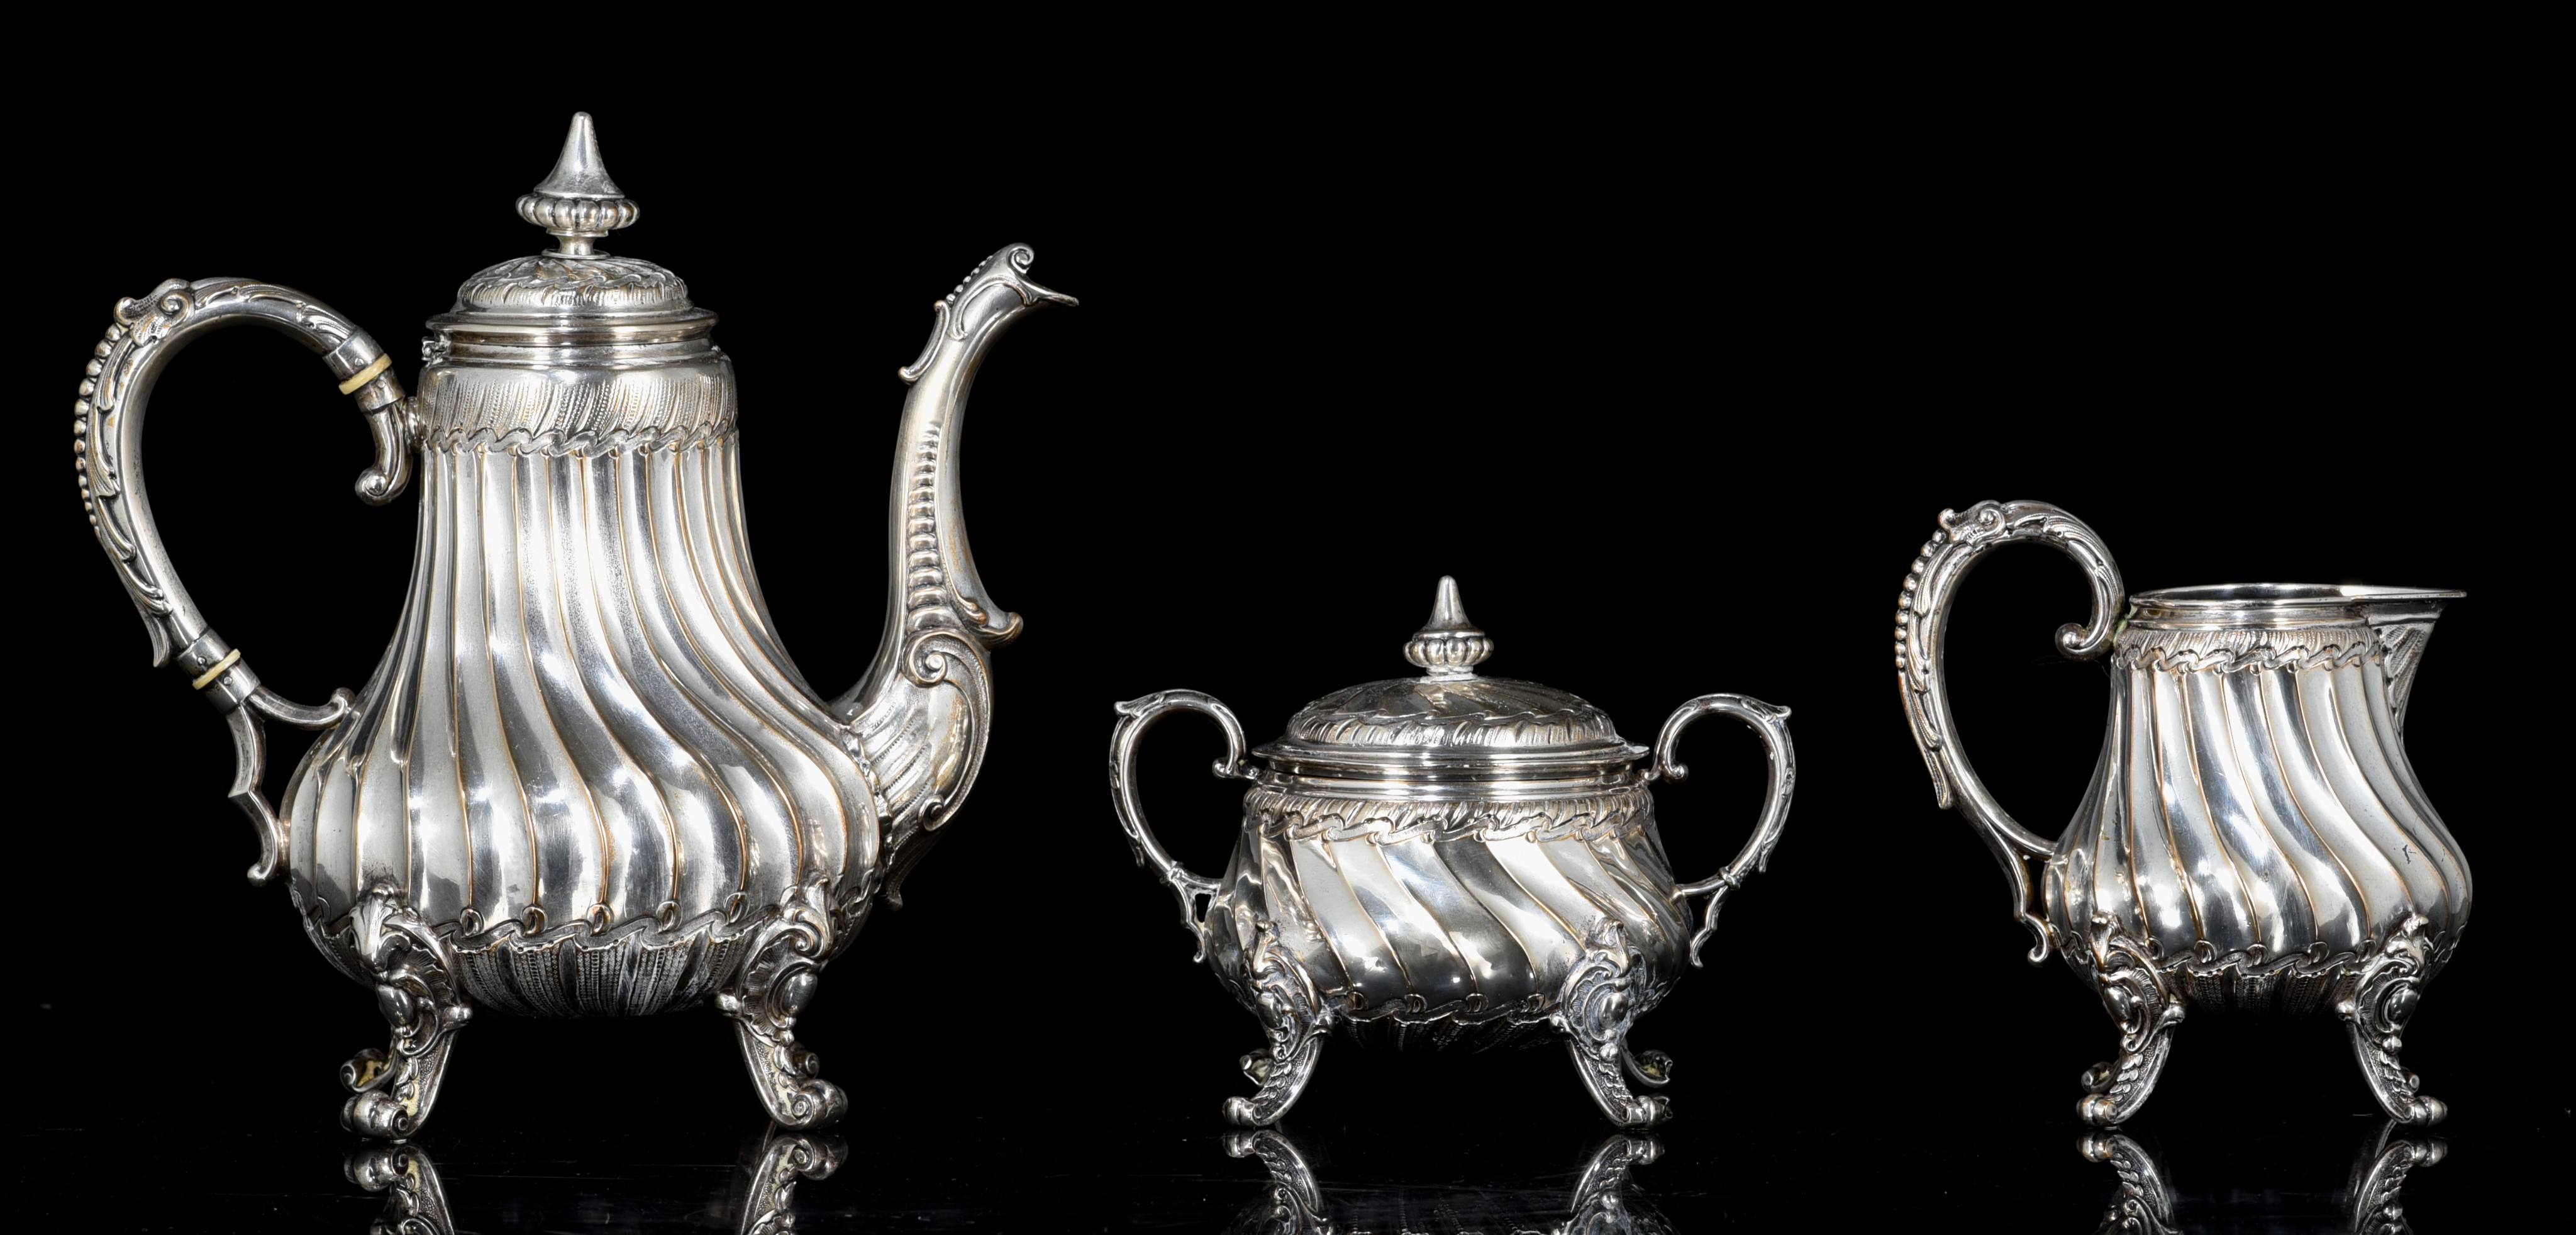 An eclectic three-part silver coffee set, Austria-Hungarian import hallmark (1872-1901) - Image 3 of 11